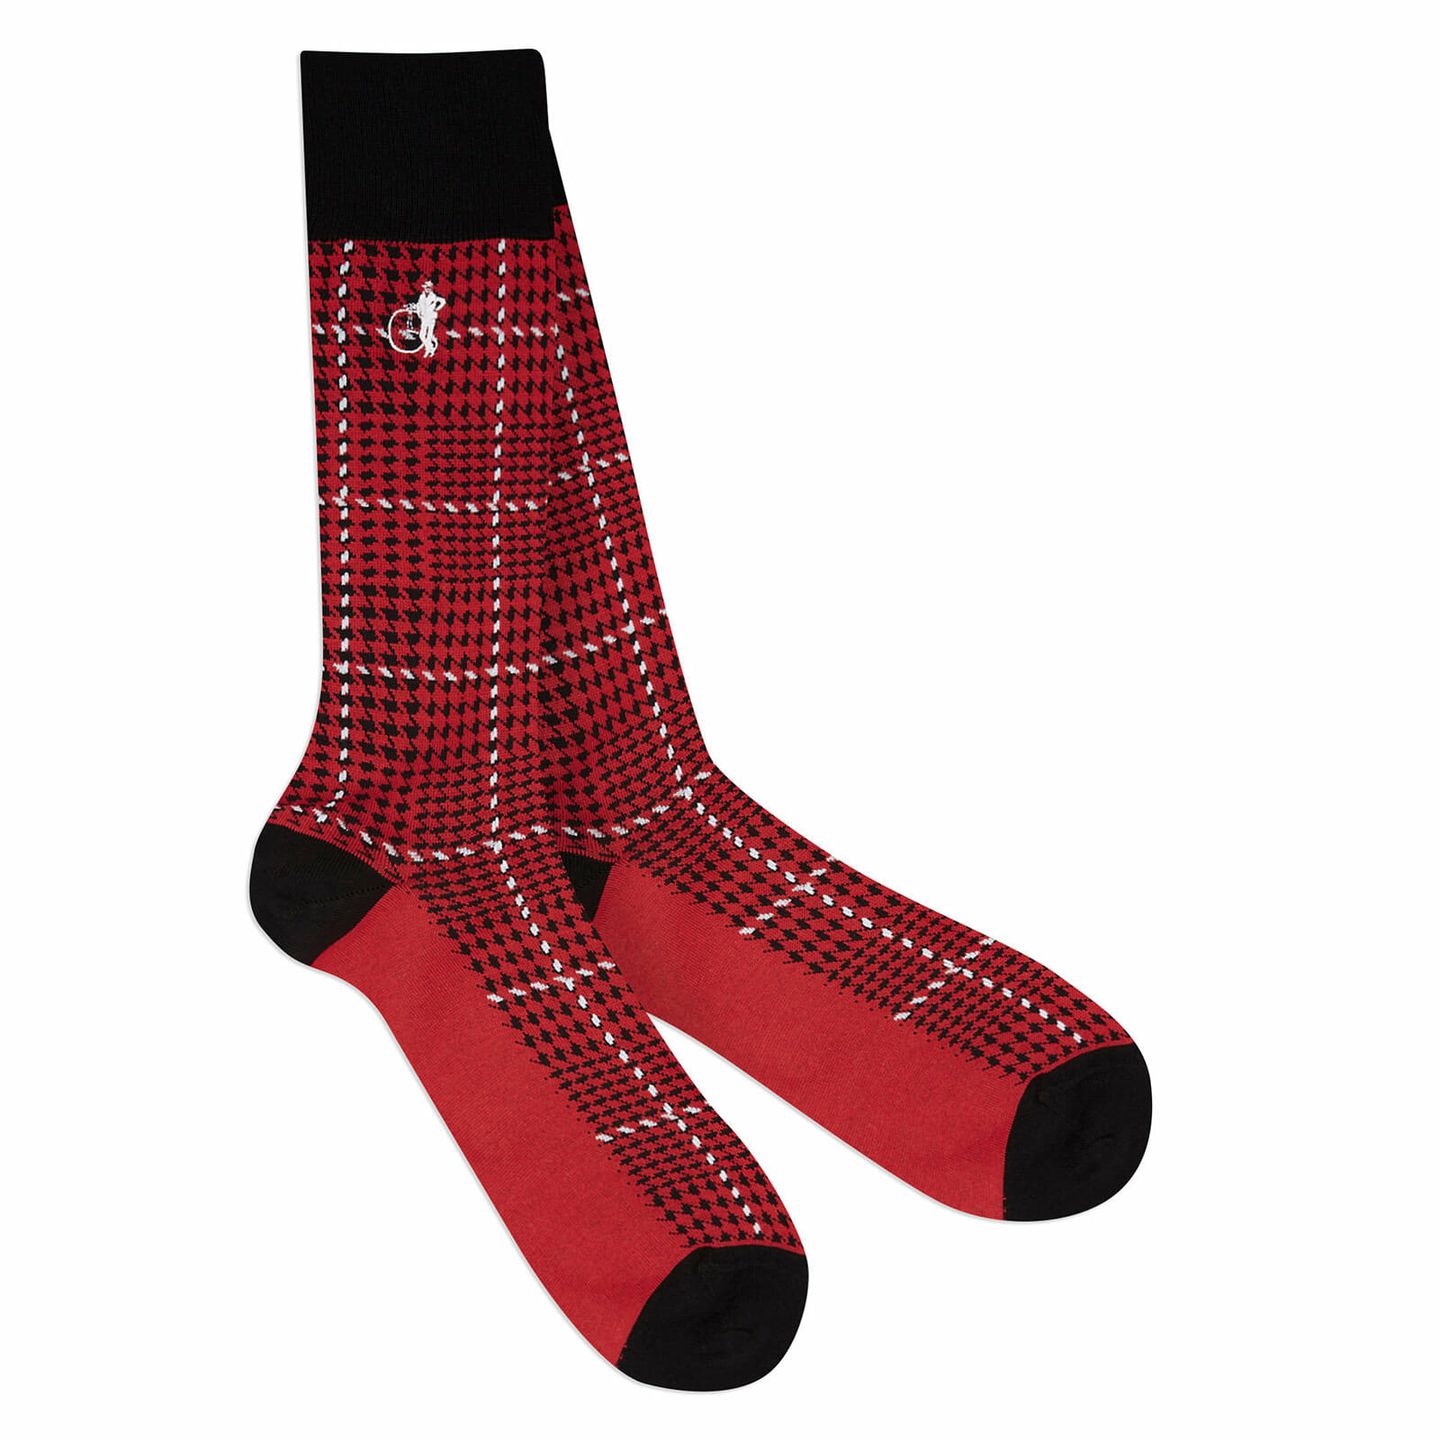 Red cross hatched patterned Ottoway socks with white and black detail